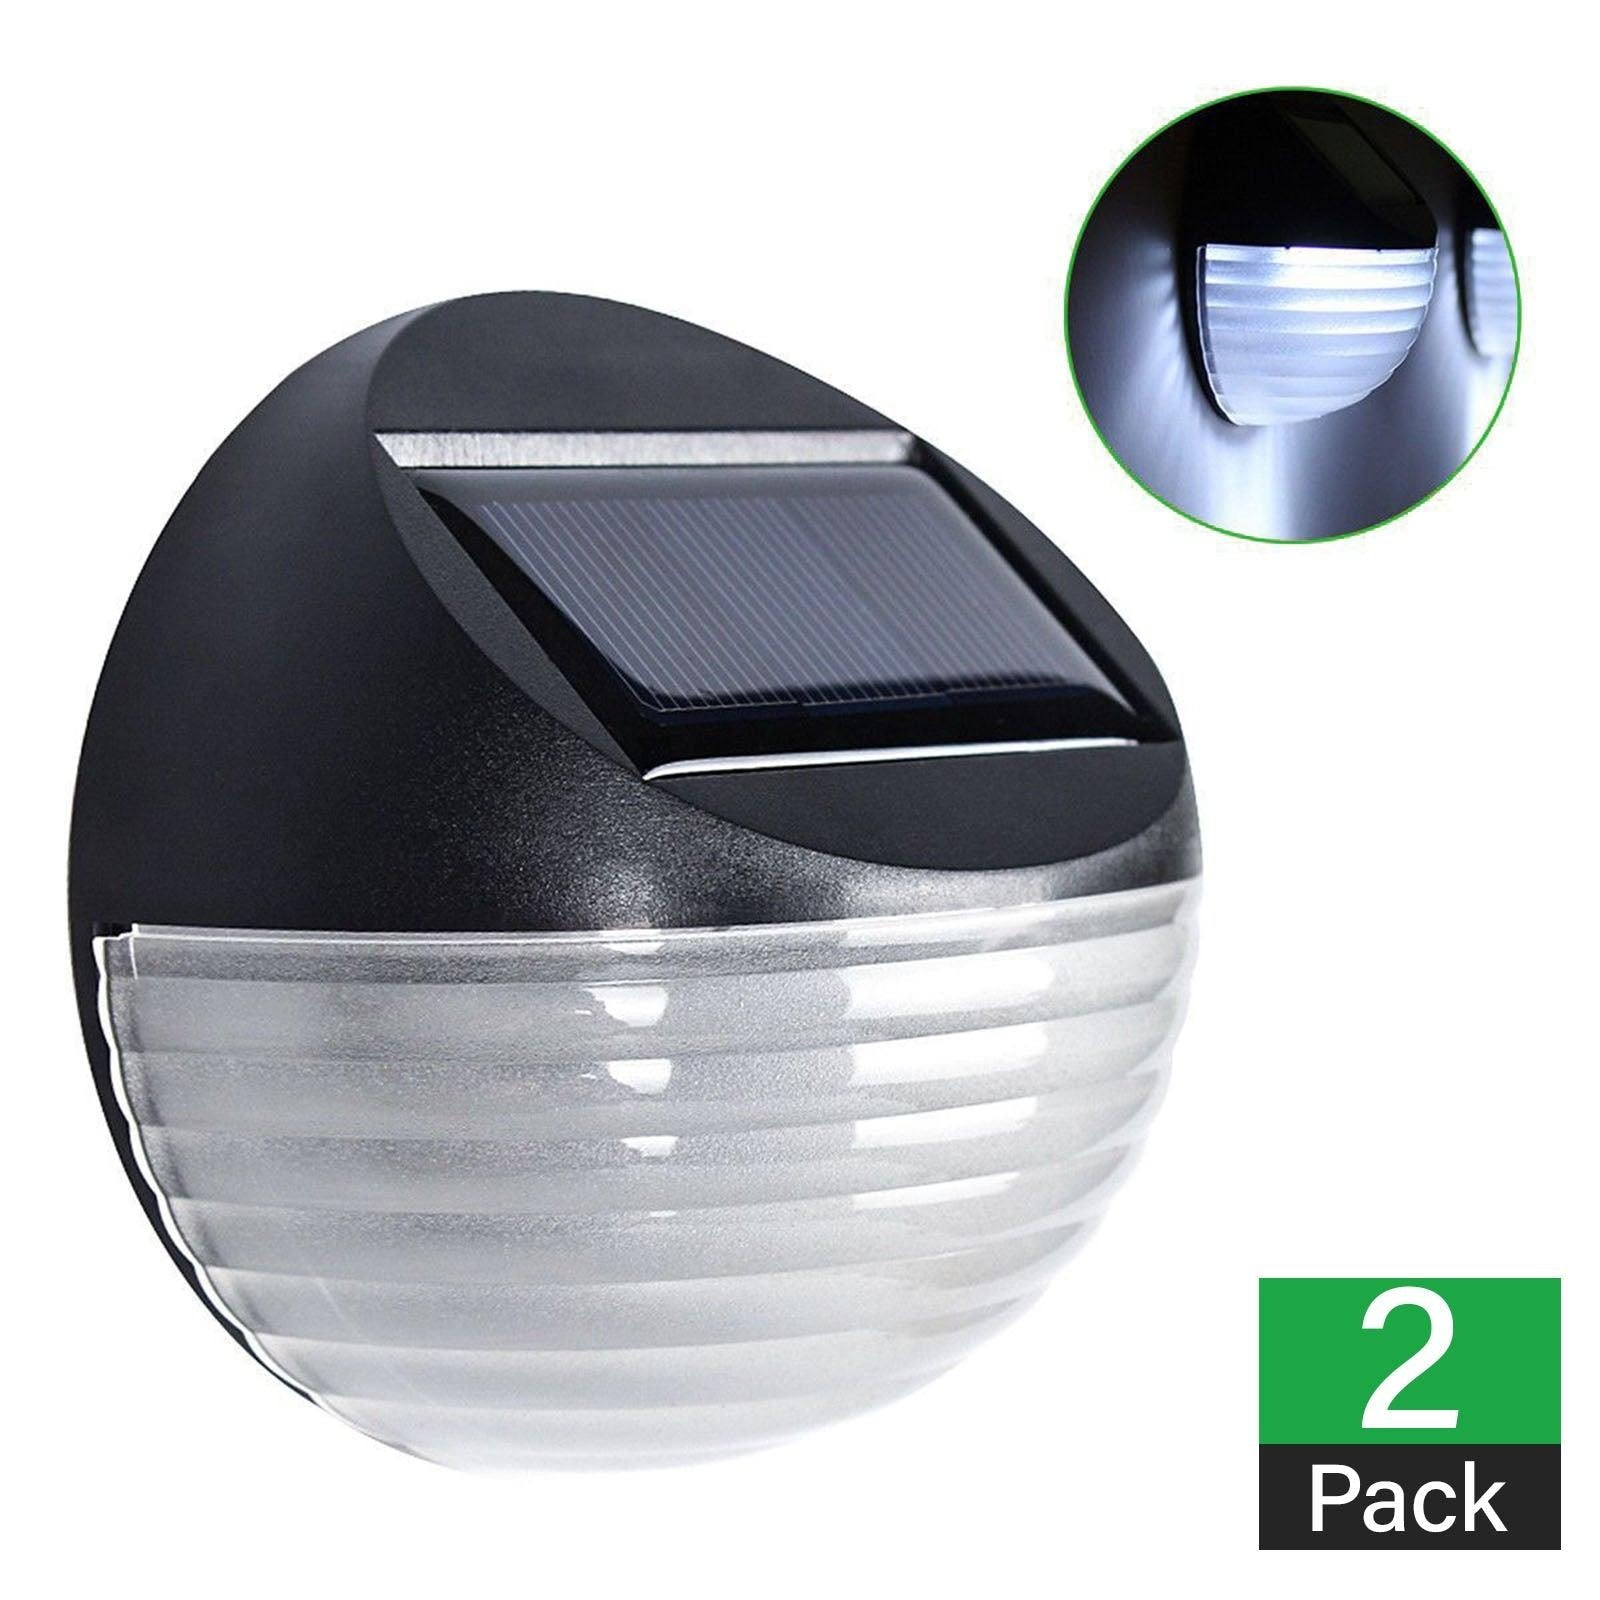 2 X Fence Lights Round Solar Powered LED Waterproof Outdoor Garden Wall Pathway Black Pack Deals499